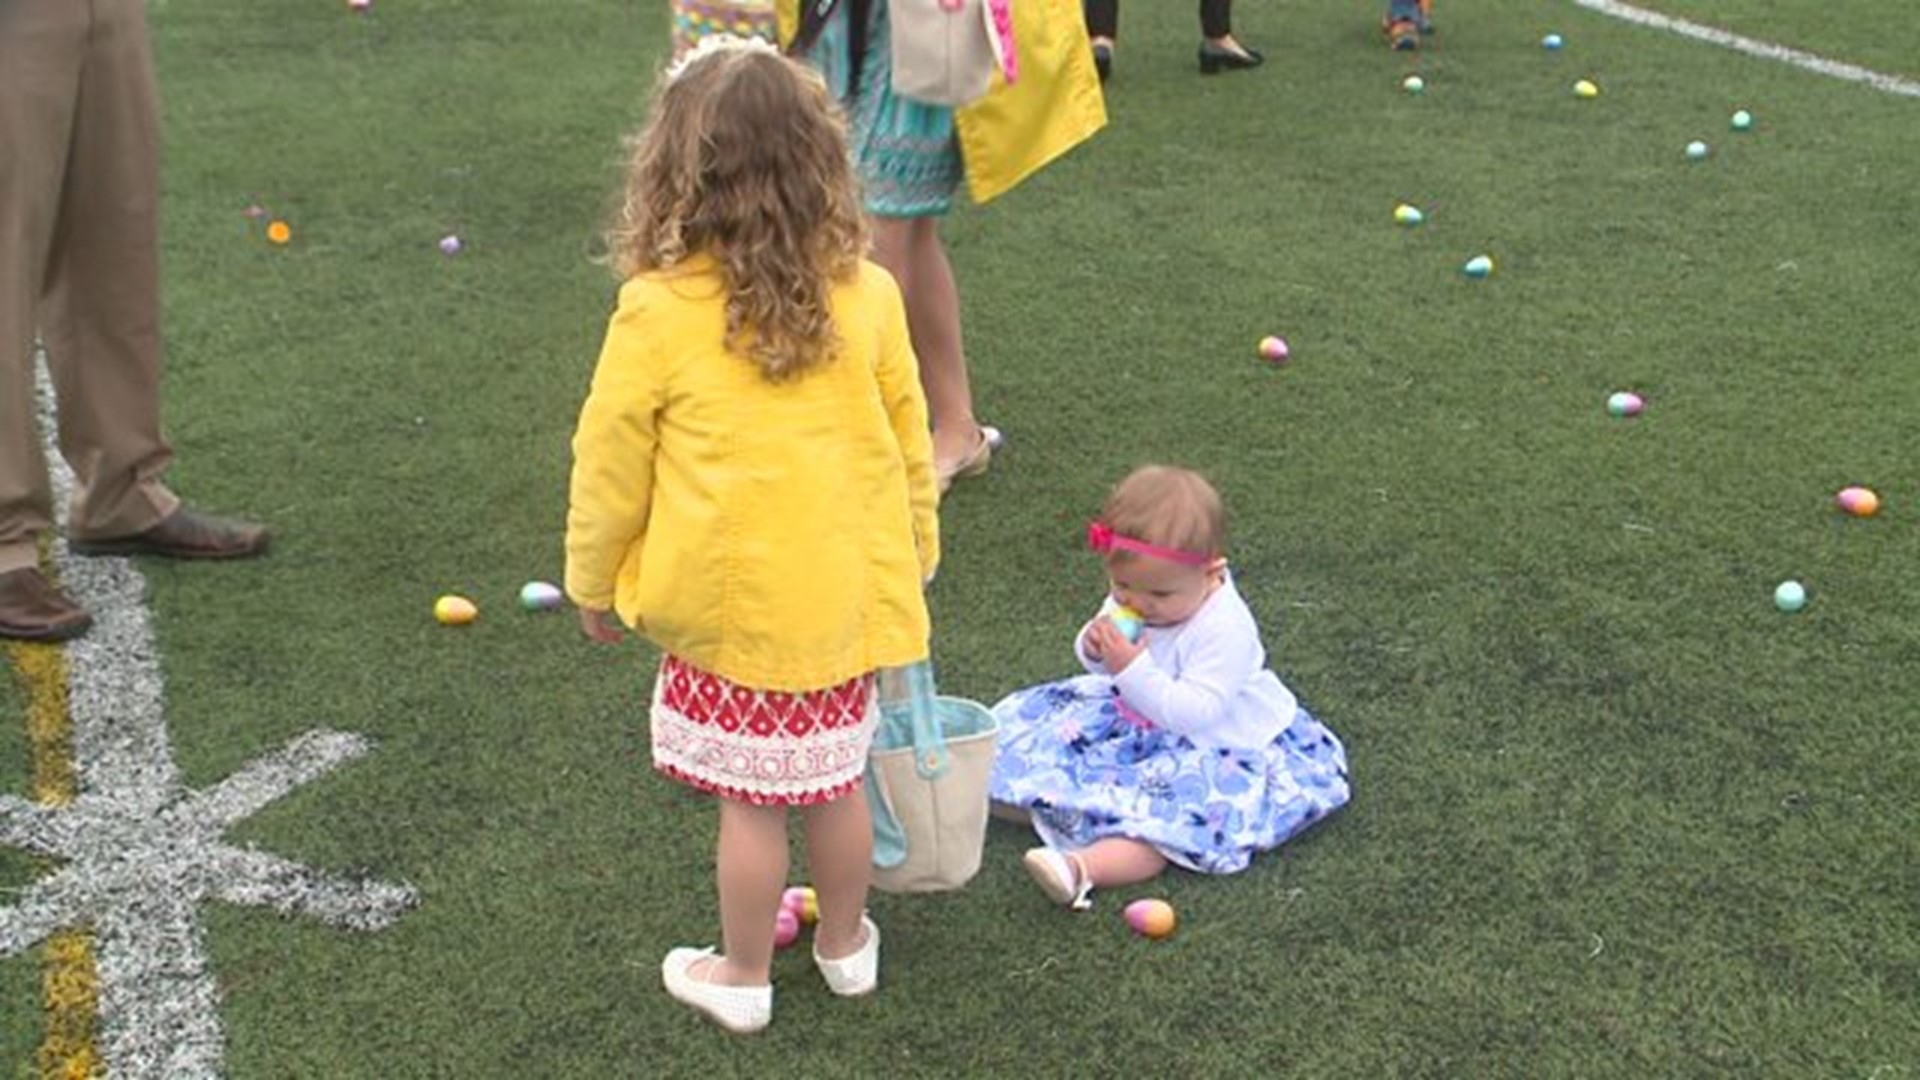 West Hartford Easter egg hunt goes without a hitch